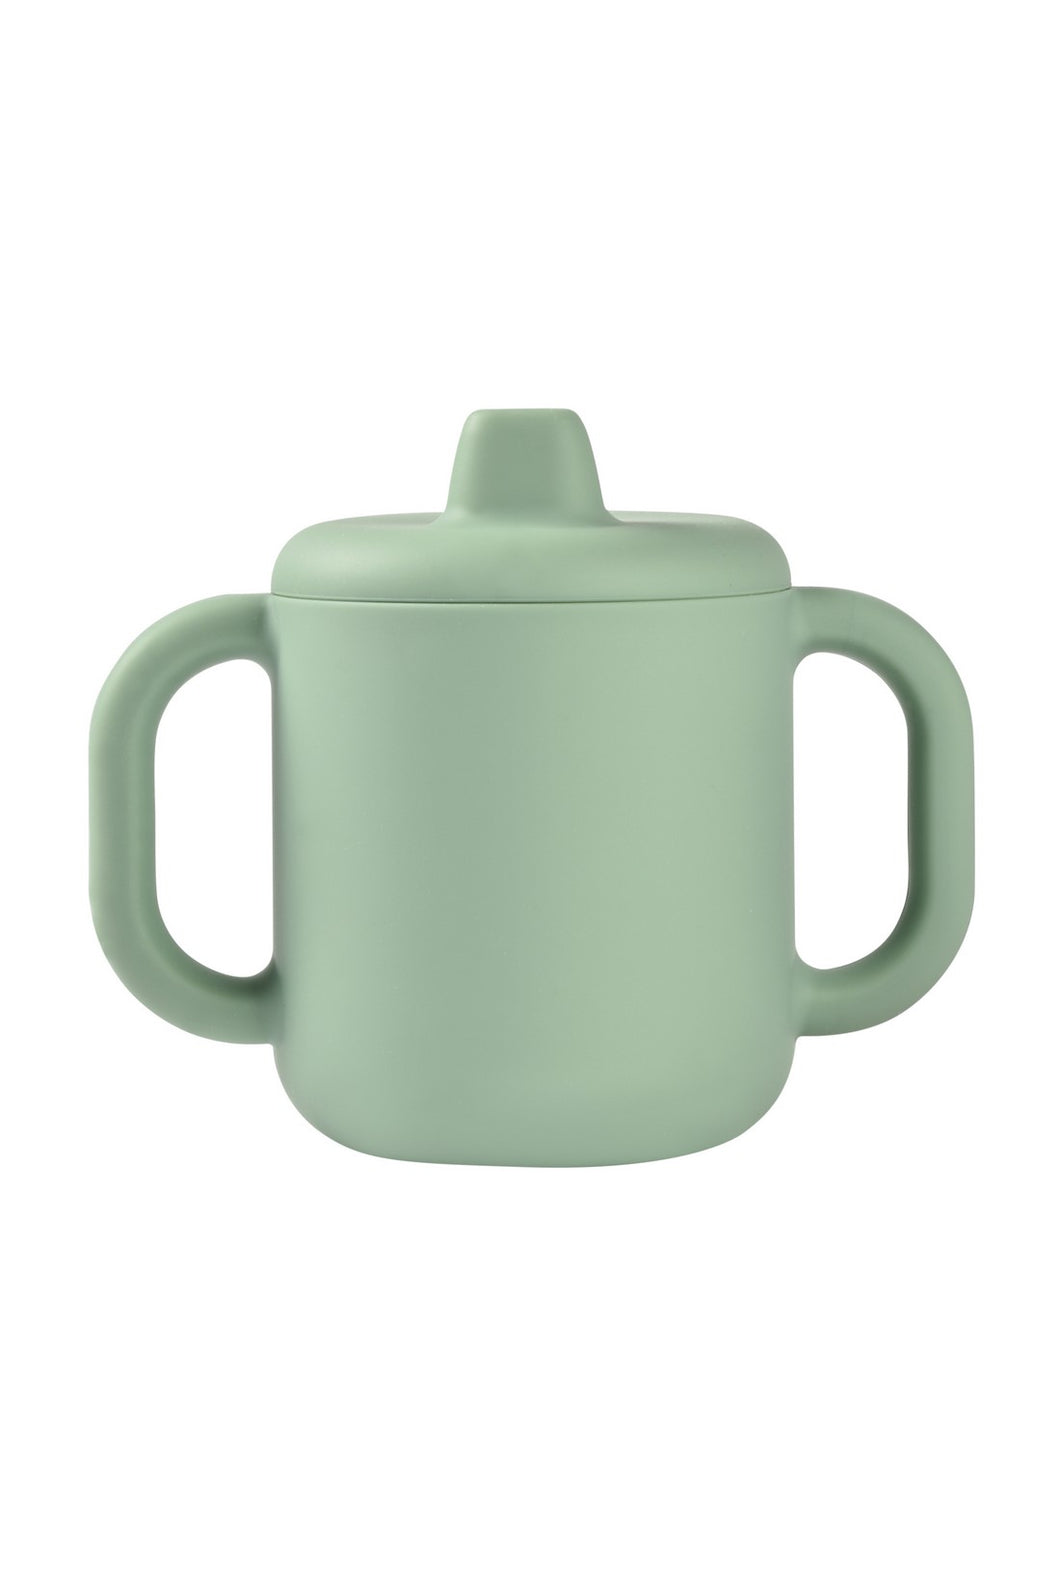 Beaba Silicone Learning Cup 170ml Sage Green 4